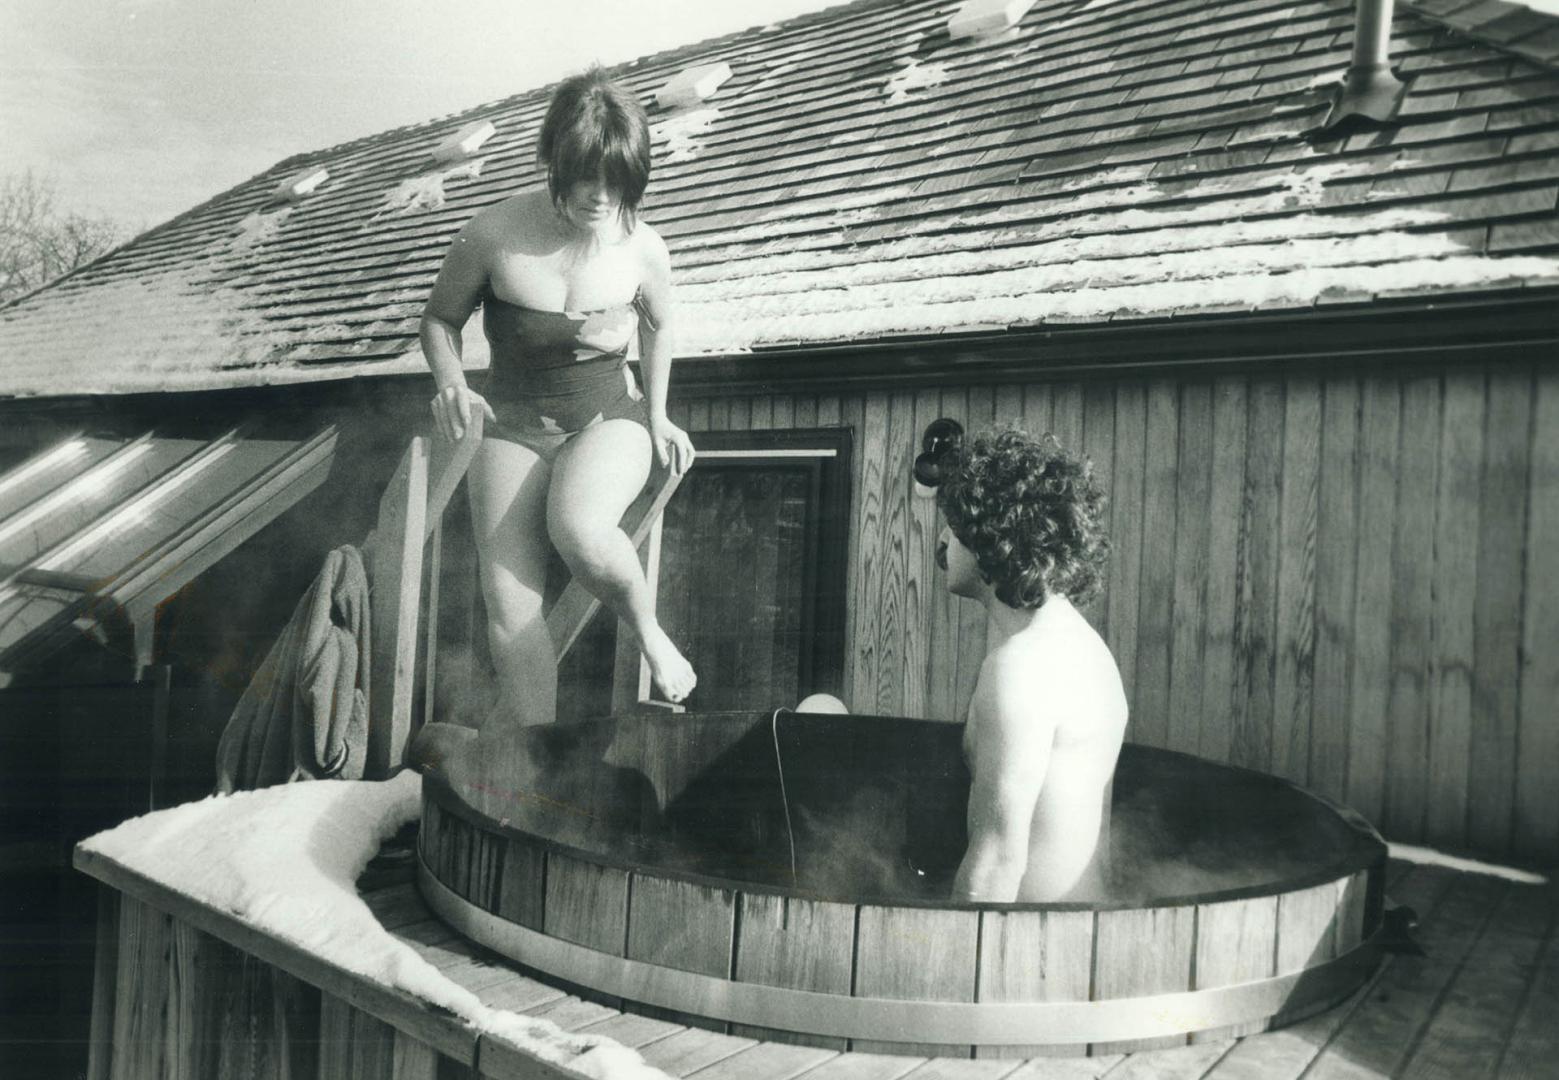 Warming up: Reporter Judy Nyman and Harley Mintz in their backyard (on the third floor) tub, enjoying the hot whirling water and keeping warm, while winter temperatures are grim